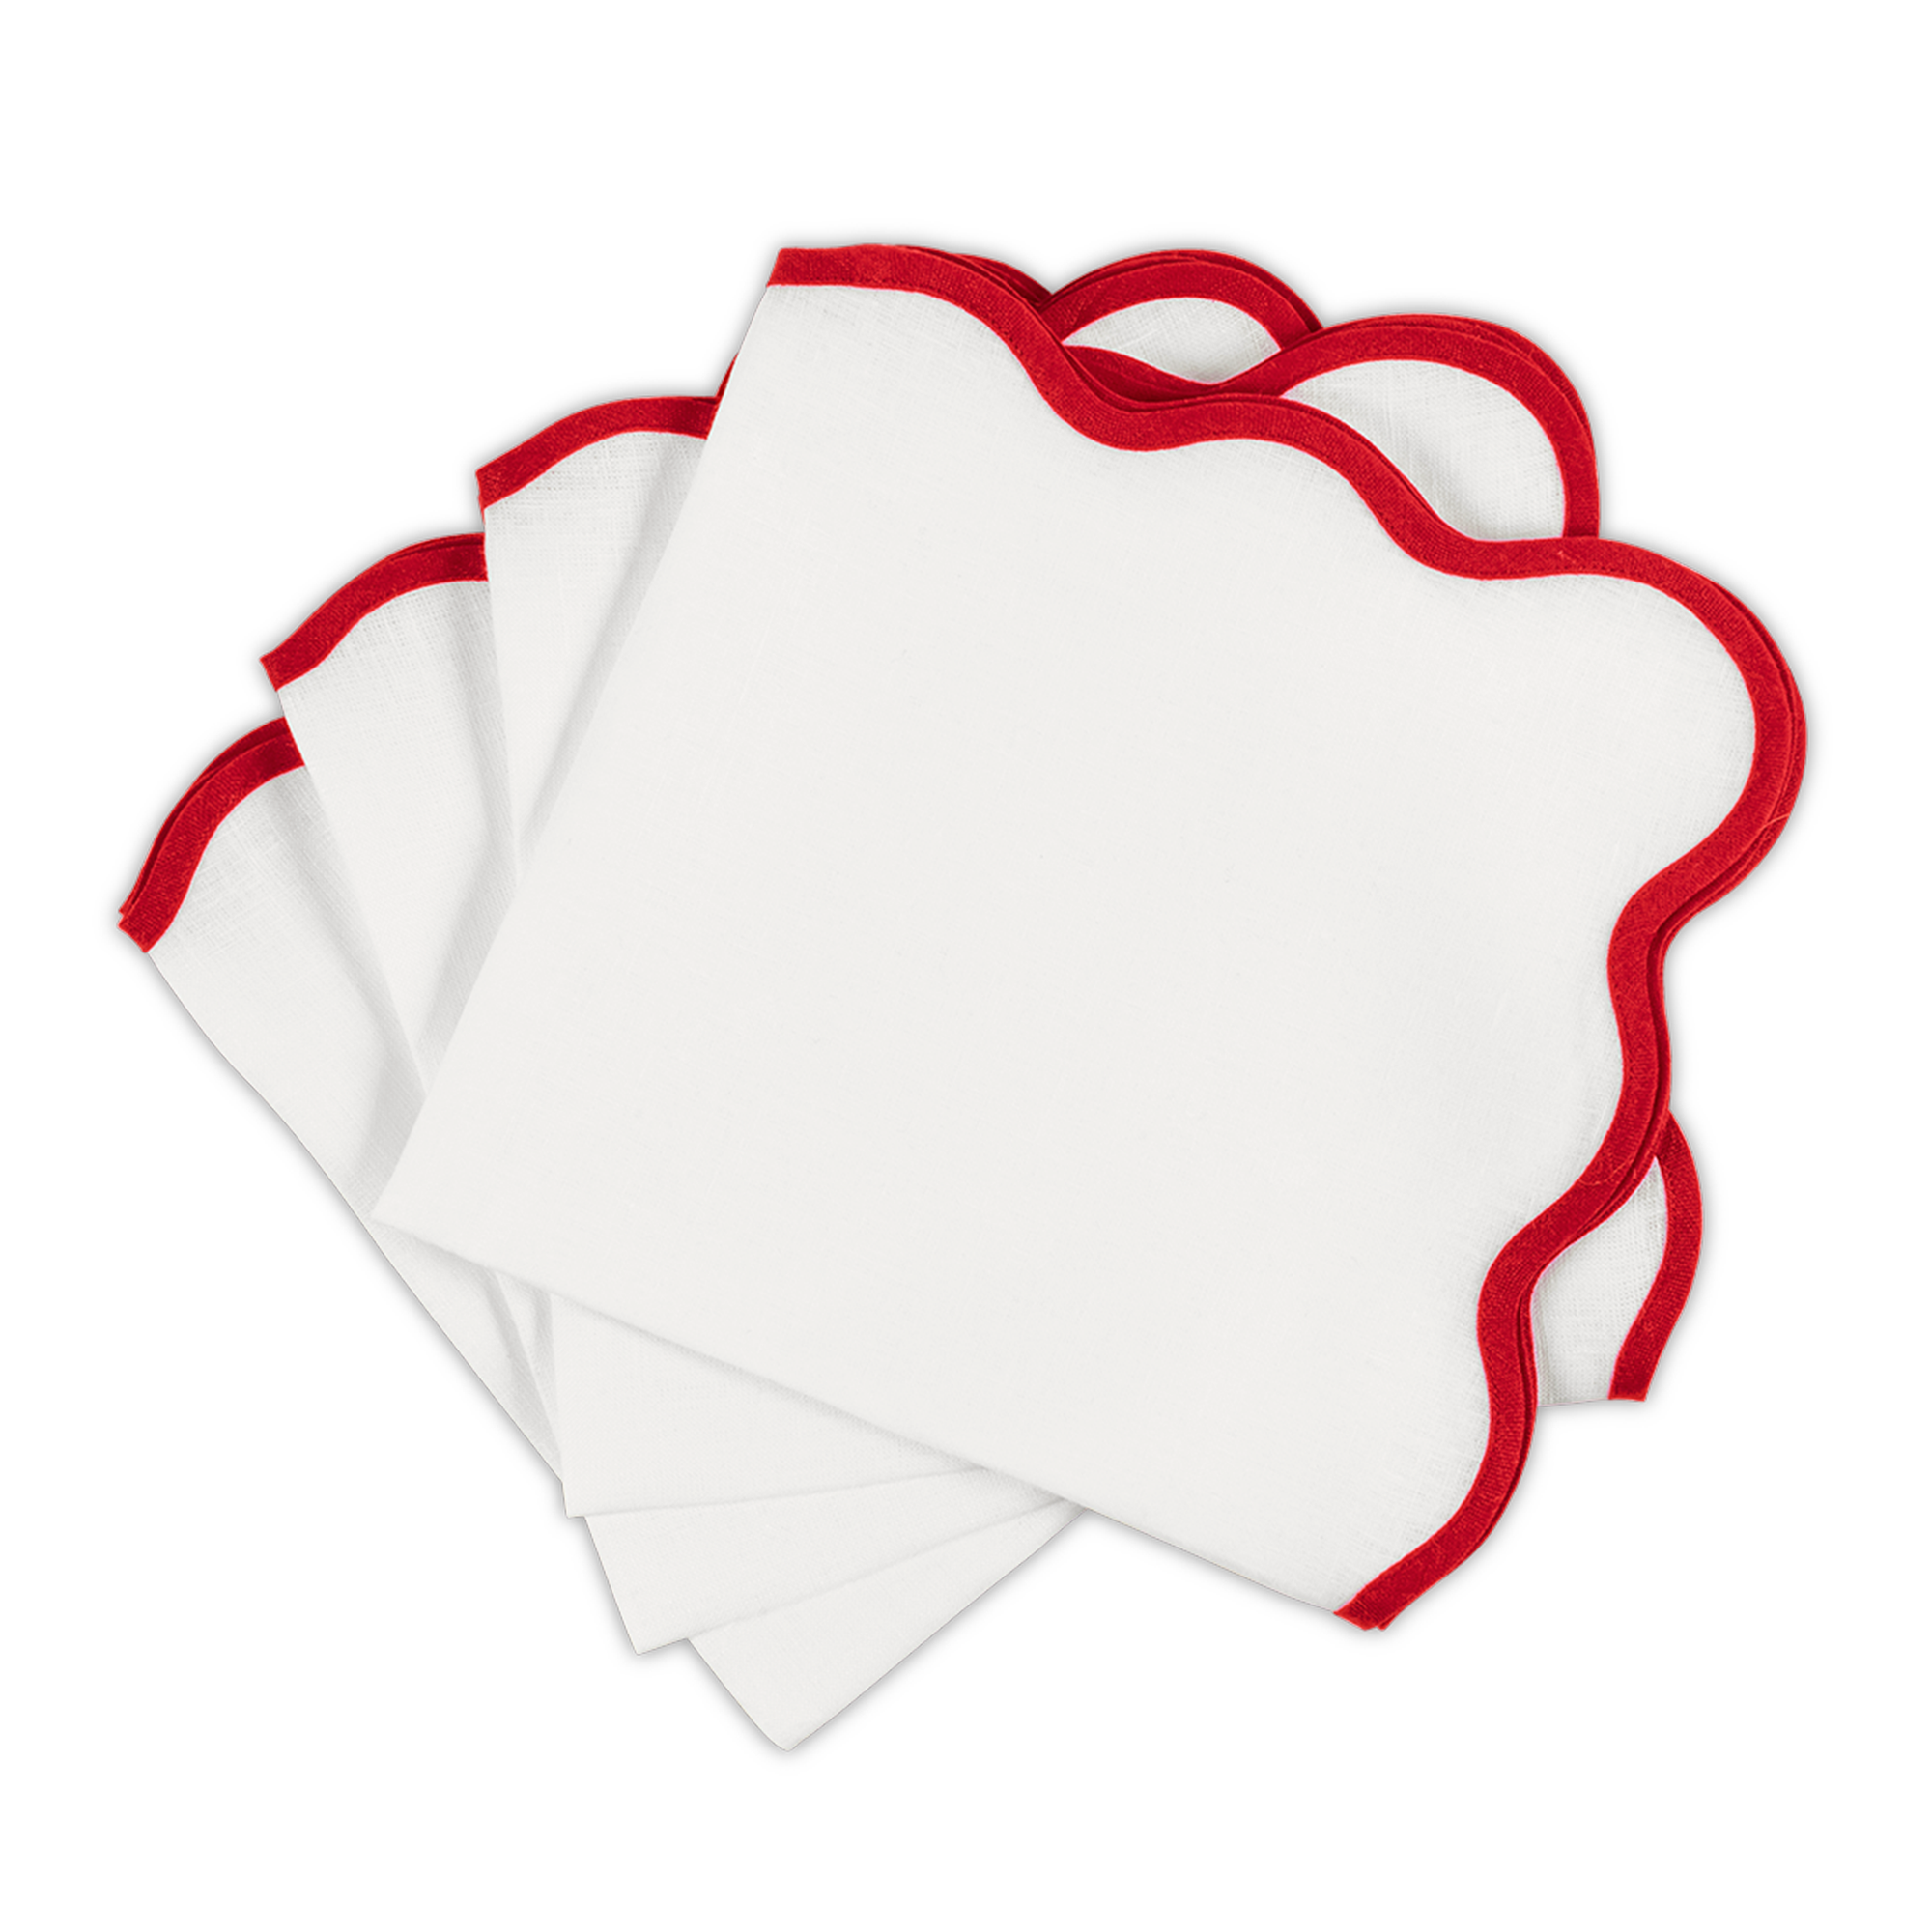 Dinner Napkins of Matouk Scallop Edge Table Linens in Color Scarlet